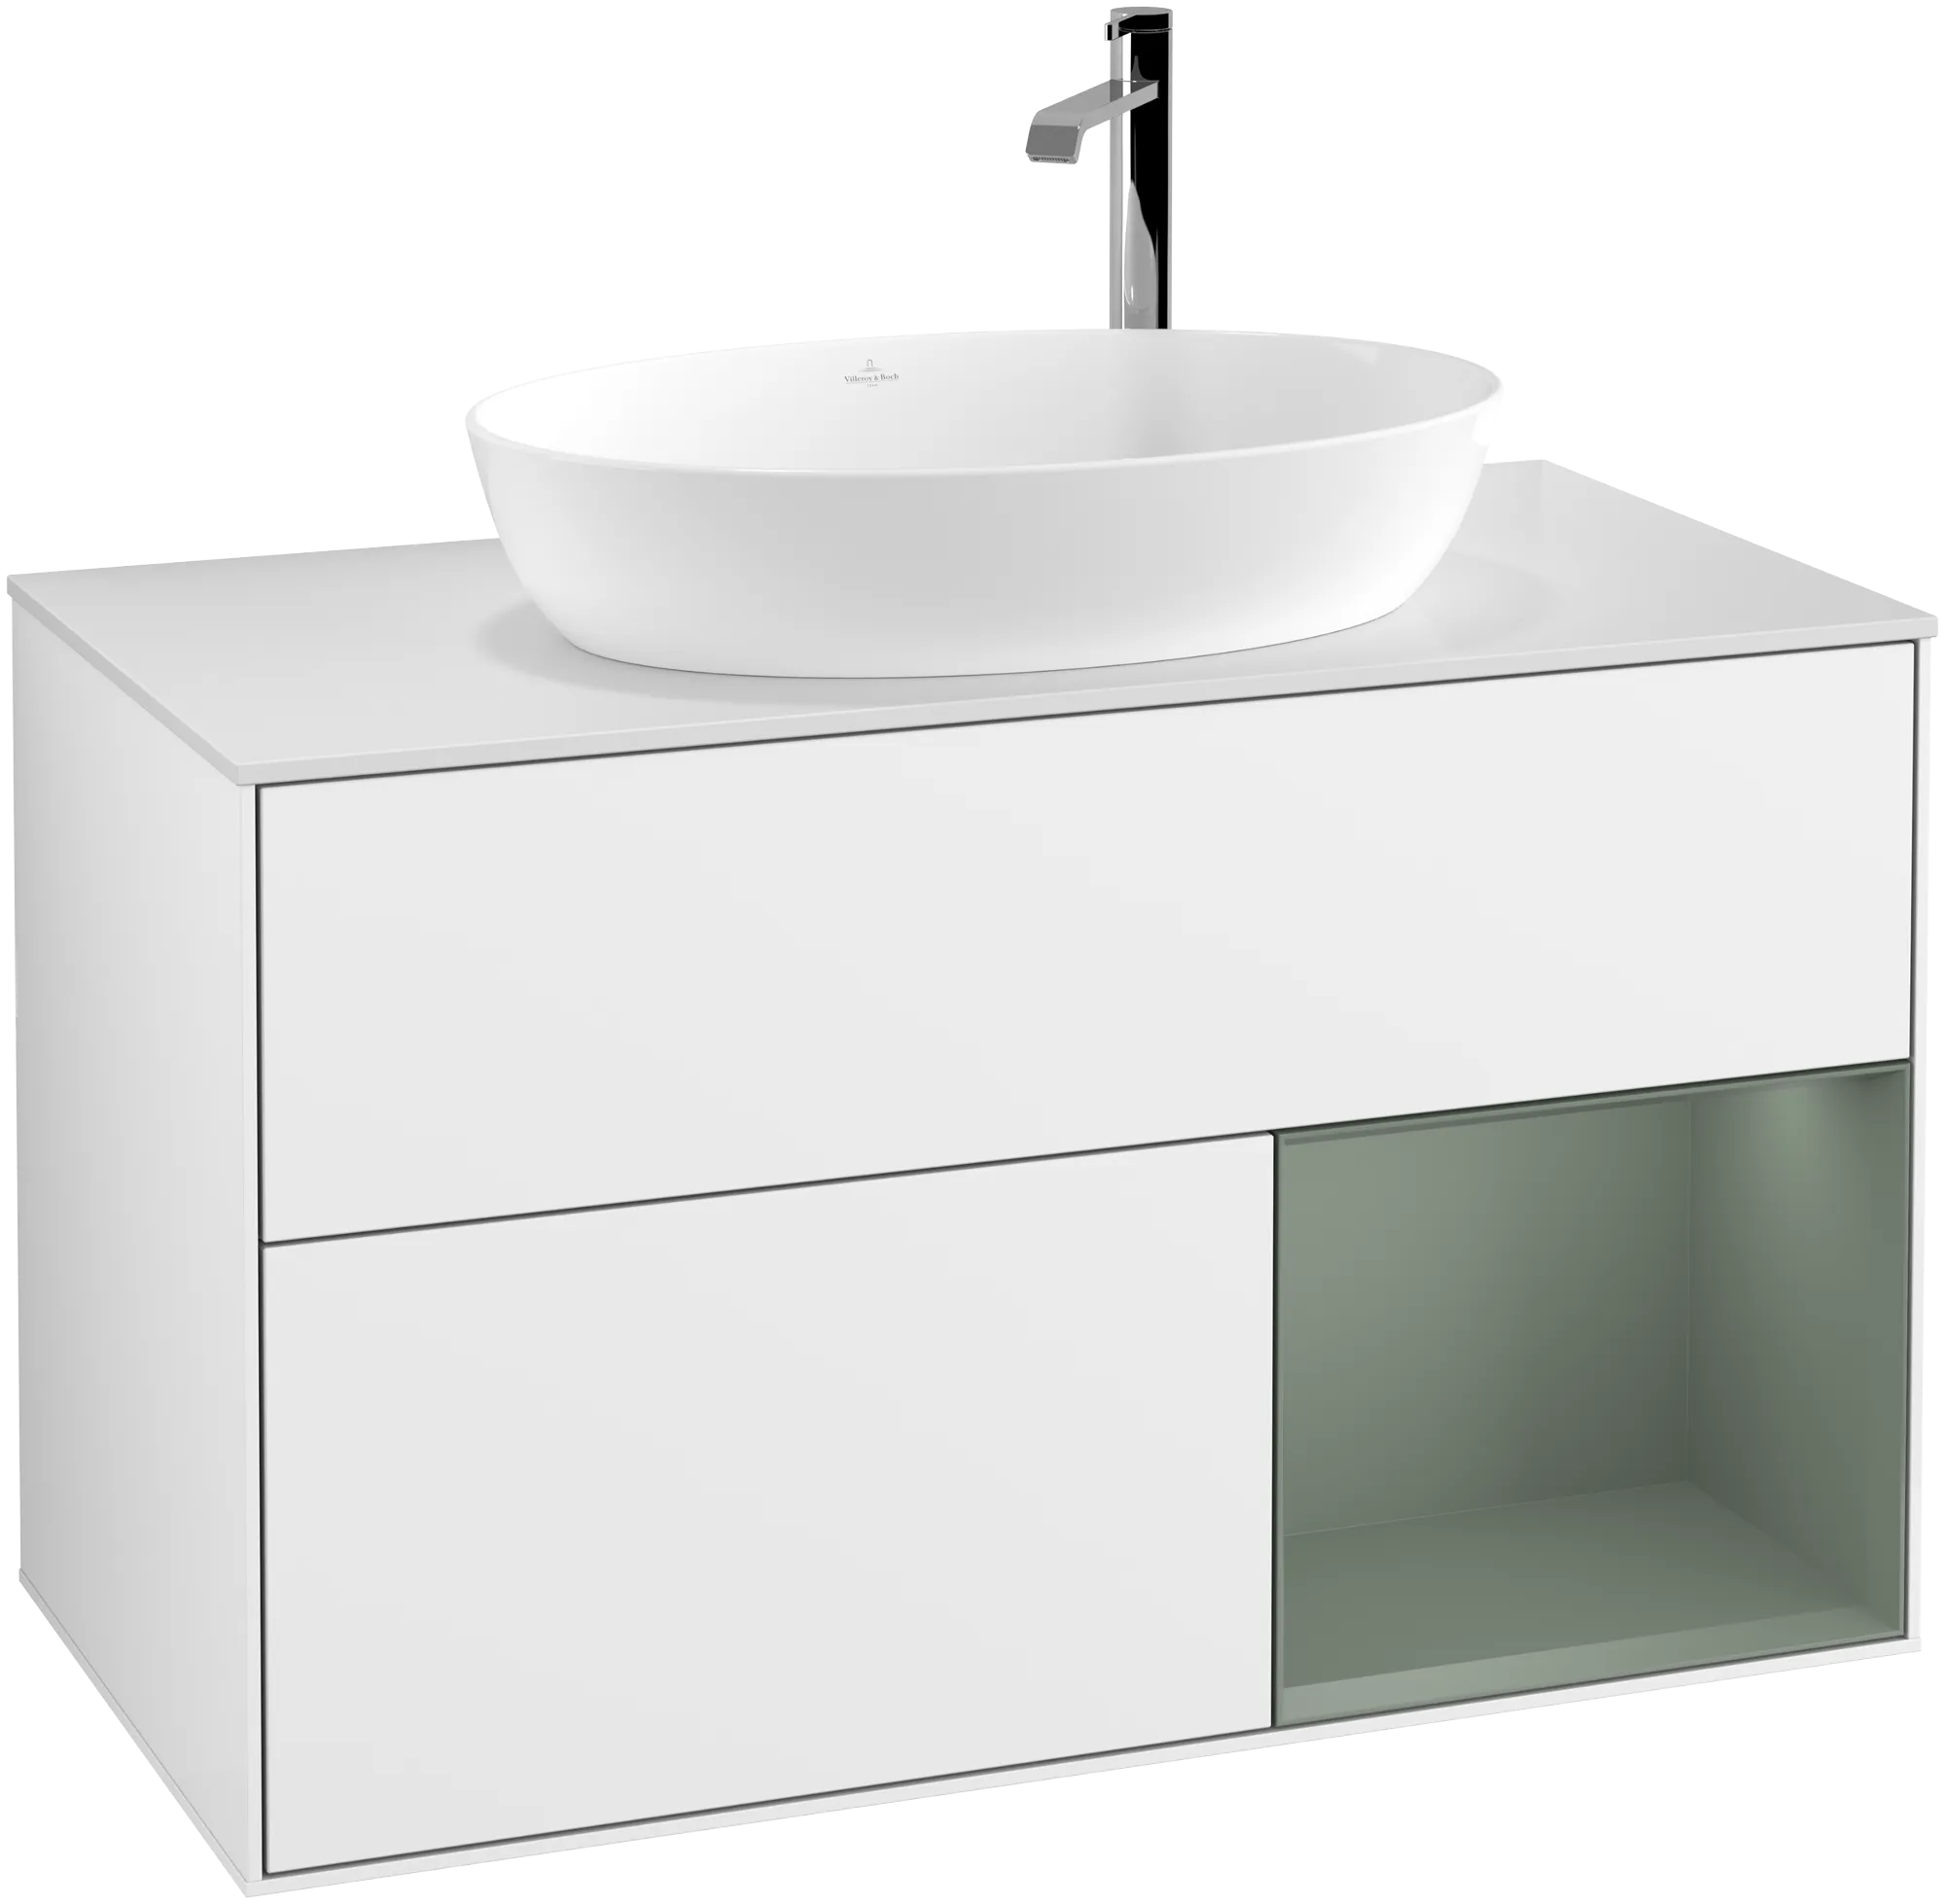 Зображення з  VILLEROY BOCH Finion Vanity unit, with lighting, 2 pull-out compartments, 1000 x 603 x 501 mm, Glossy White Lacquer / Olive Matt Lacquer / Glass White Matt #G901GMGF